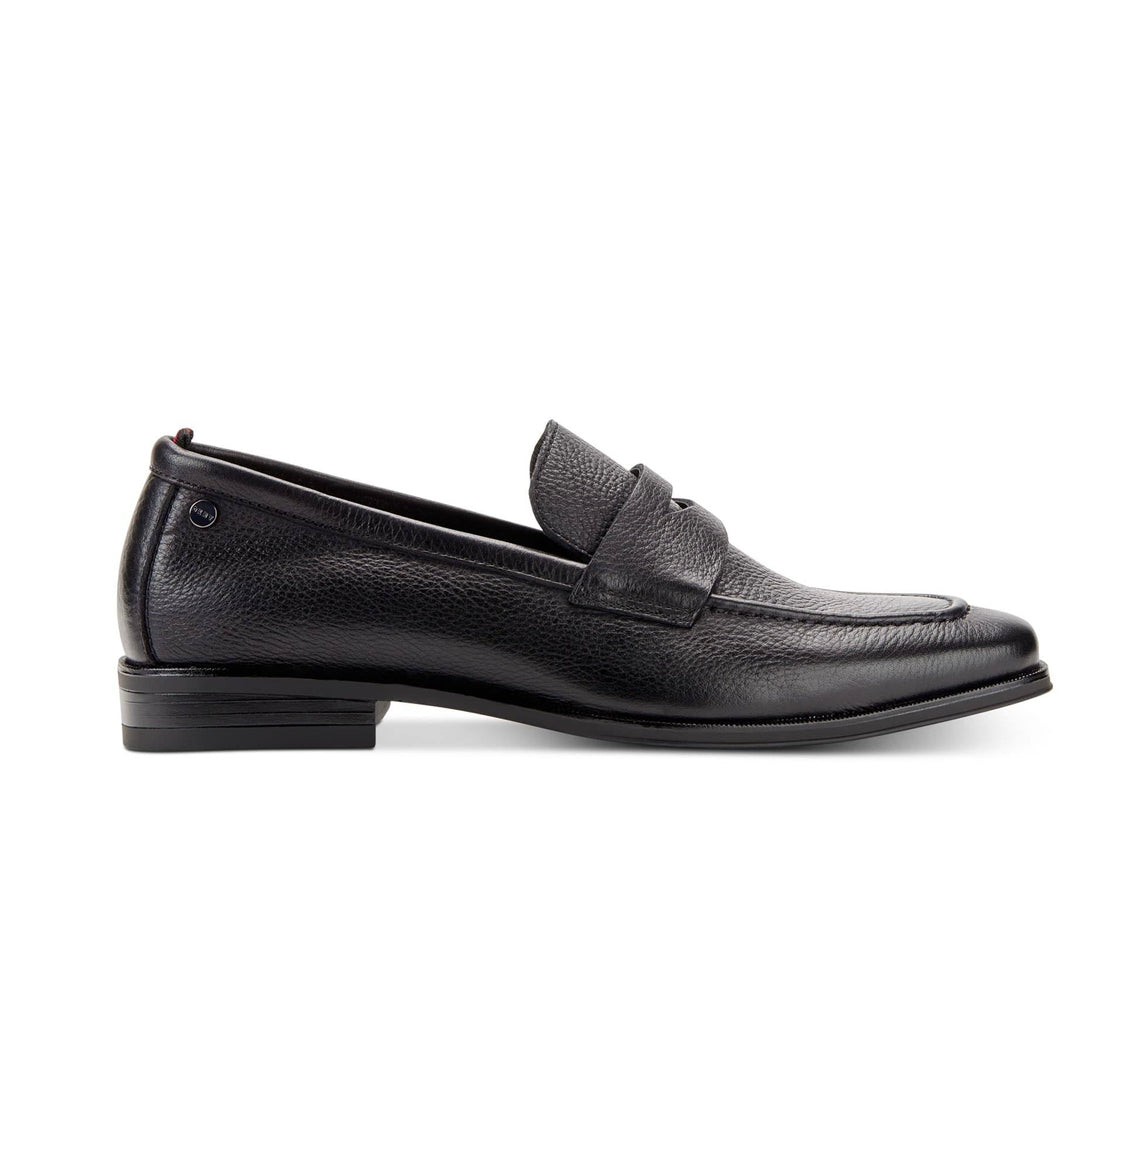 Dkny shoes for men